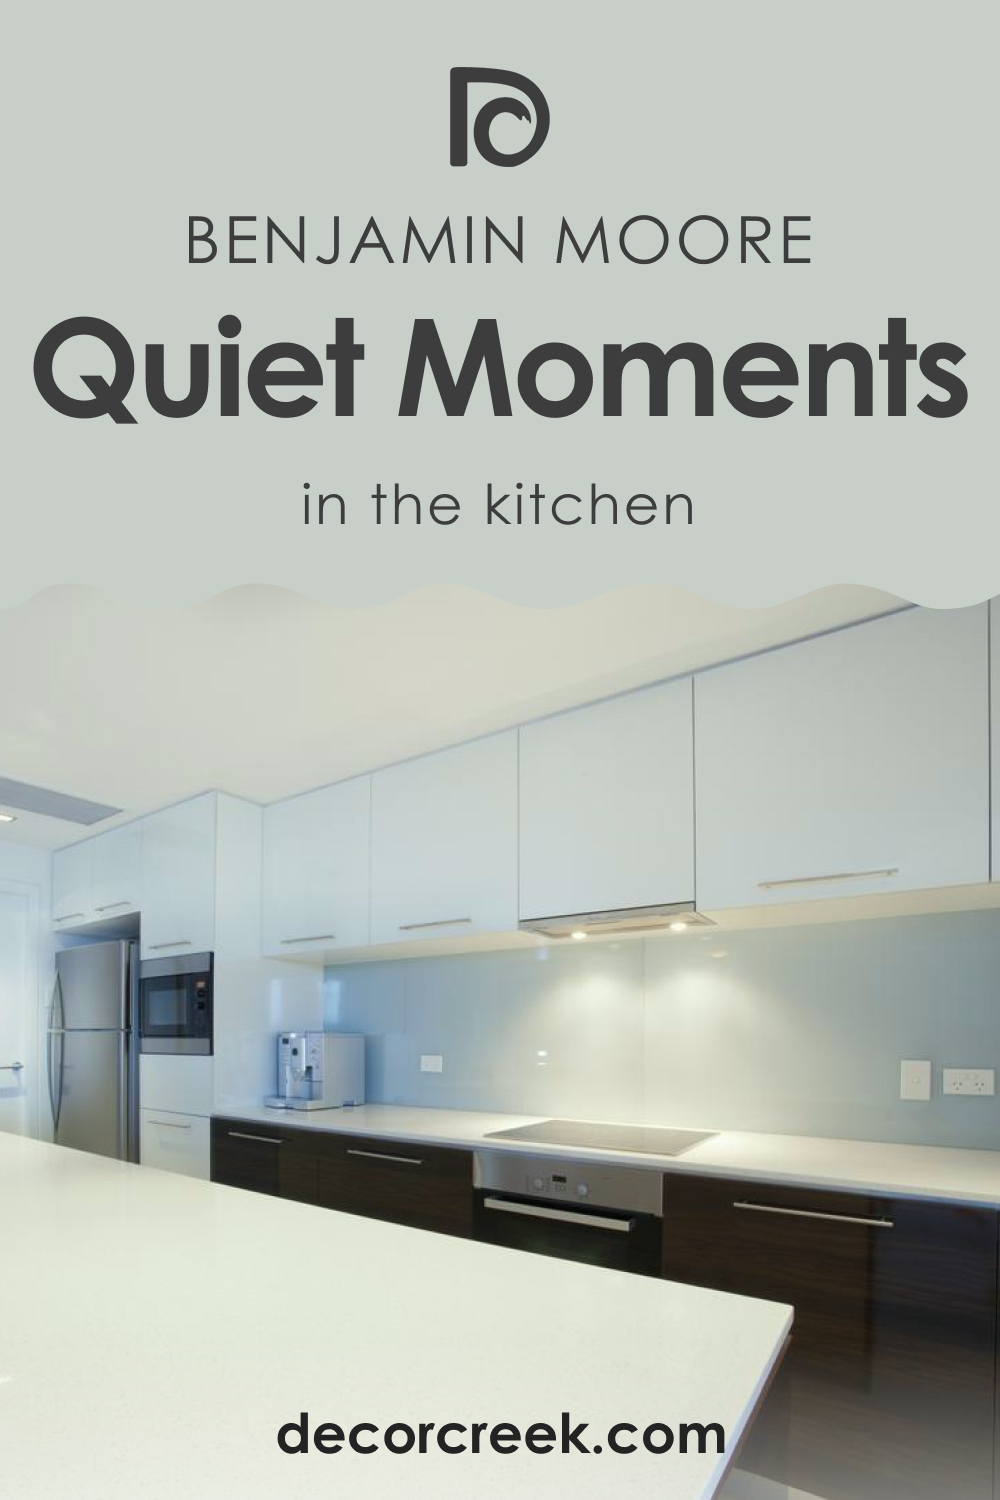 BM Quiet Moments and Kitchen